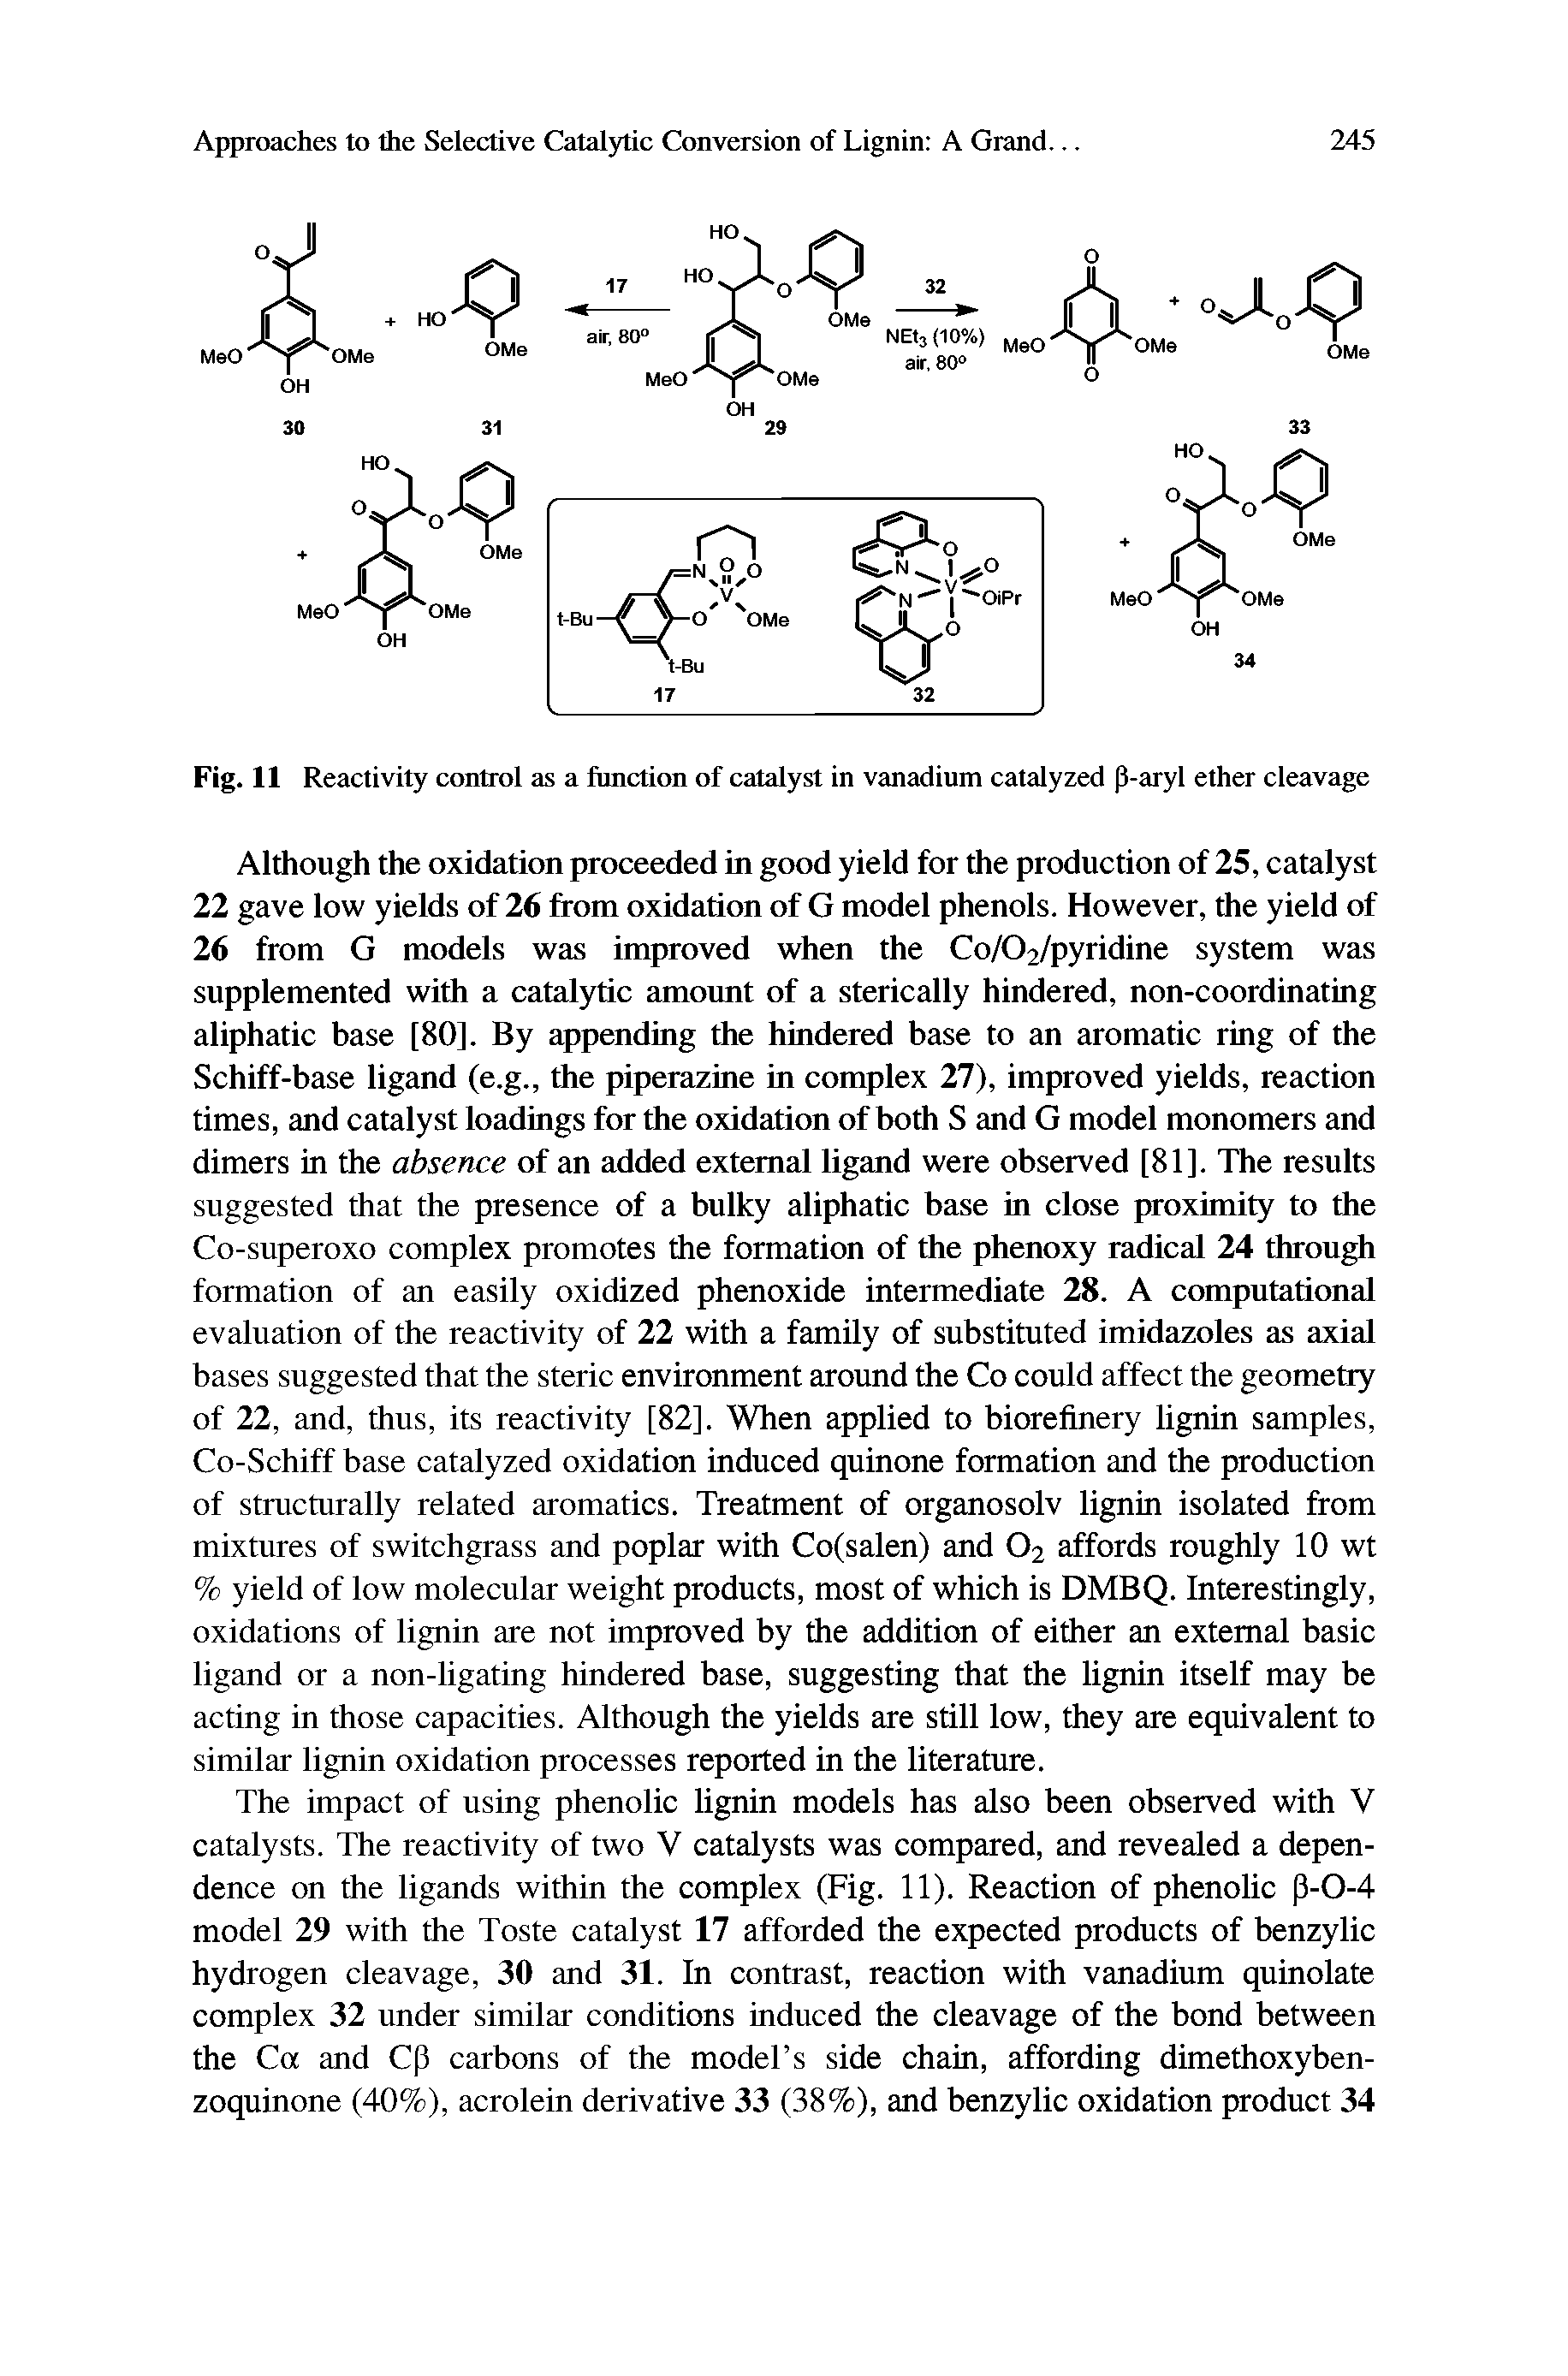 Fig. 11 Reactivity control as a function of catalyst in vanadium catalyzed p-aryl ether cleavage...